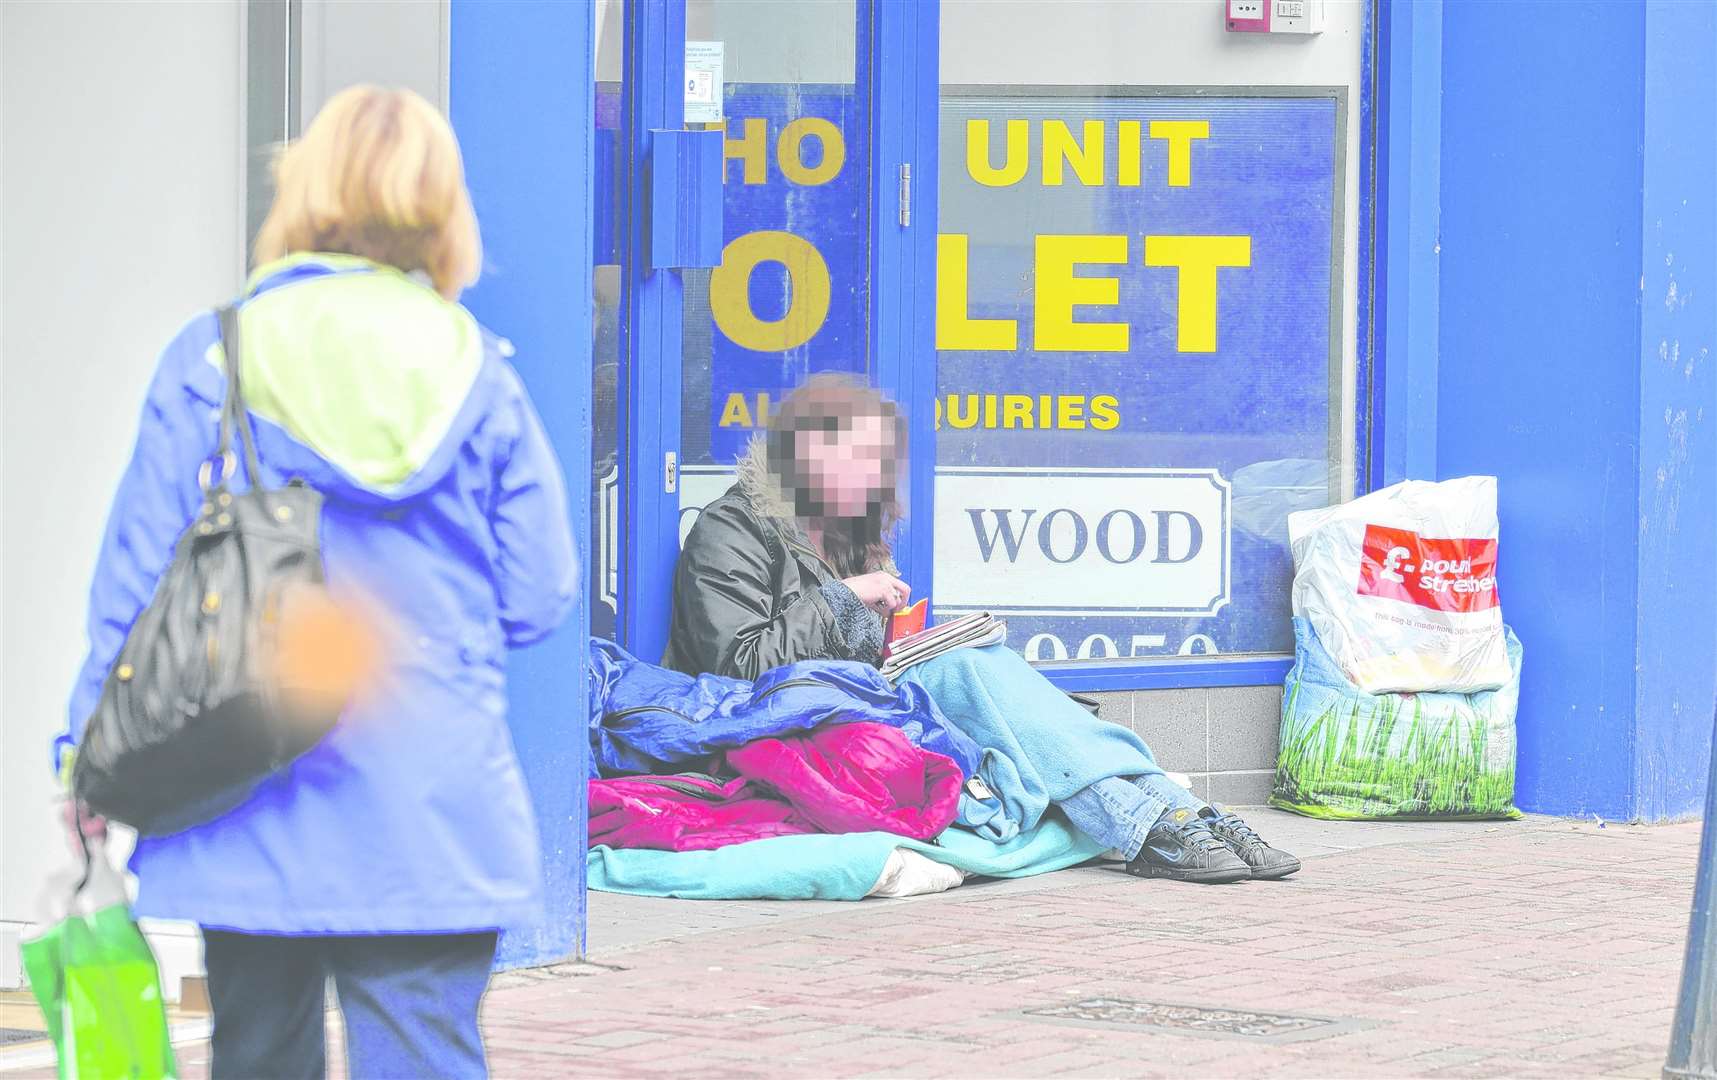 Deaths of rough sleepers in the Canterbury area equate to 6.8 deaths per 100,000 of the total population, compared to a national average of 1.4